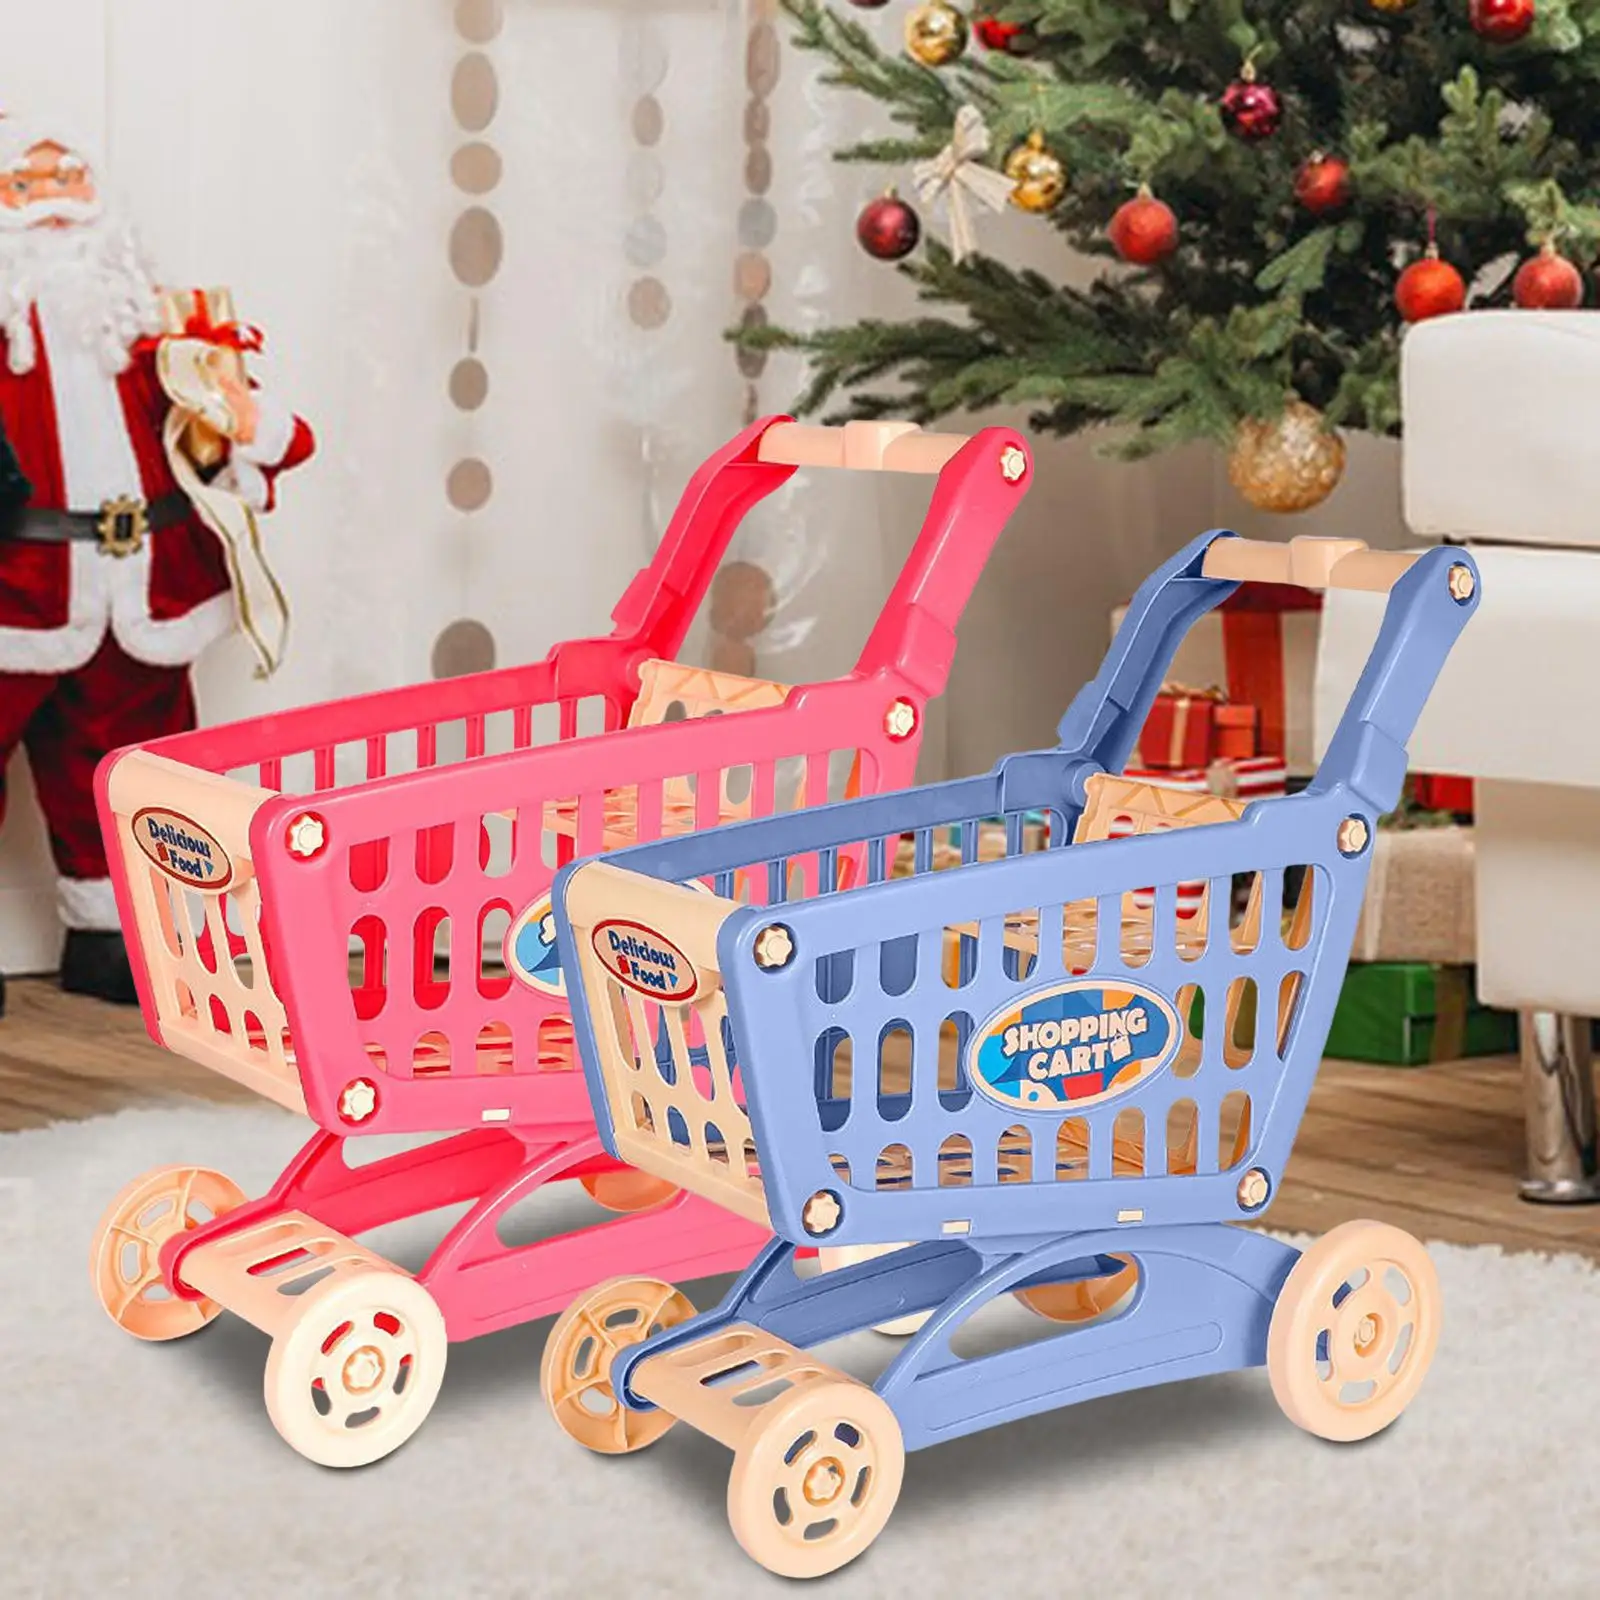 Mart Shopping Cart Shop Grocery Cart Storage Toy Children`s Shopping Cart Toys for Girls and Boys Birthday Gift Creative Toys